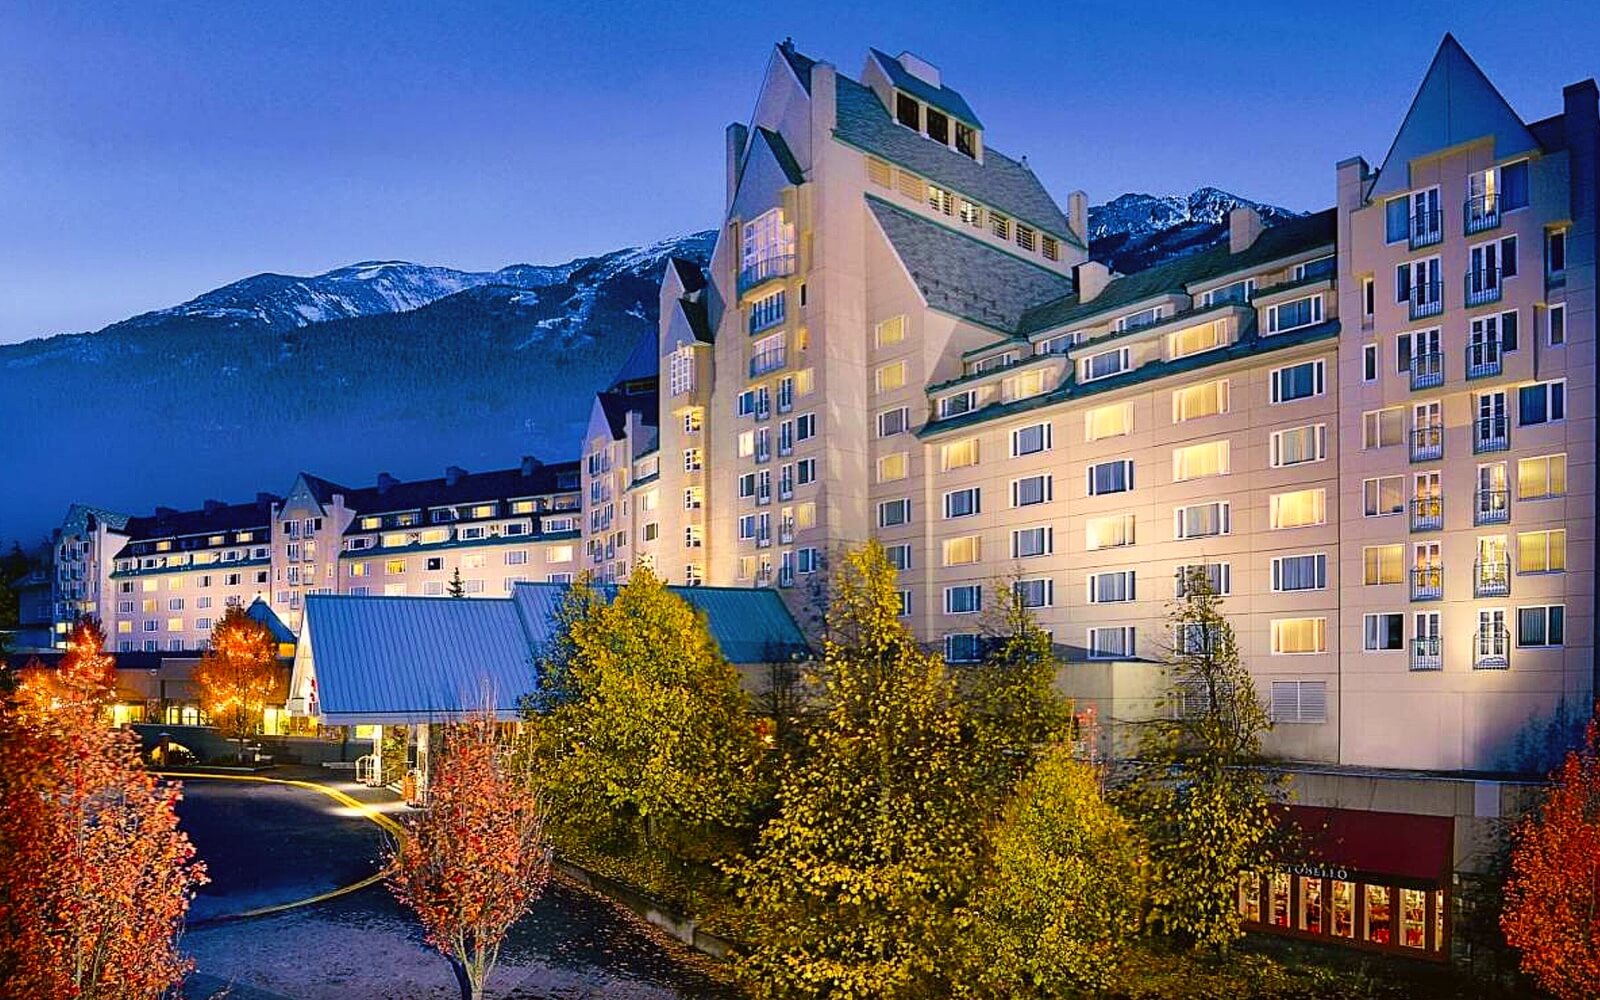 Whistler Hotels: Best Places to Stay for Skiing + Value - Vancouver Planner